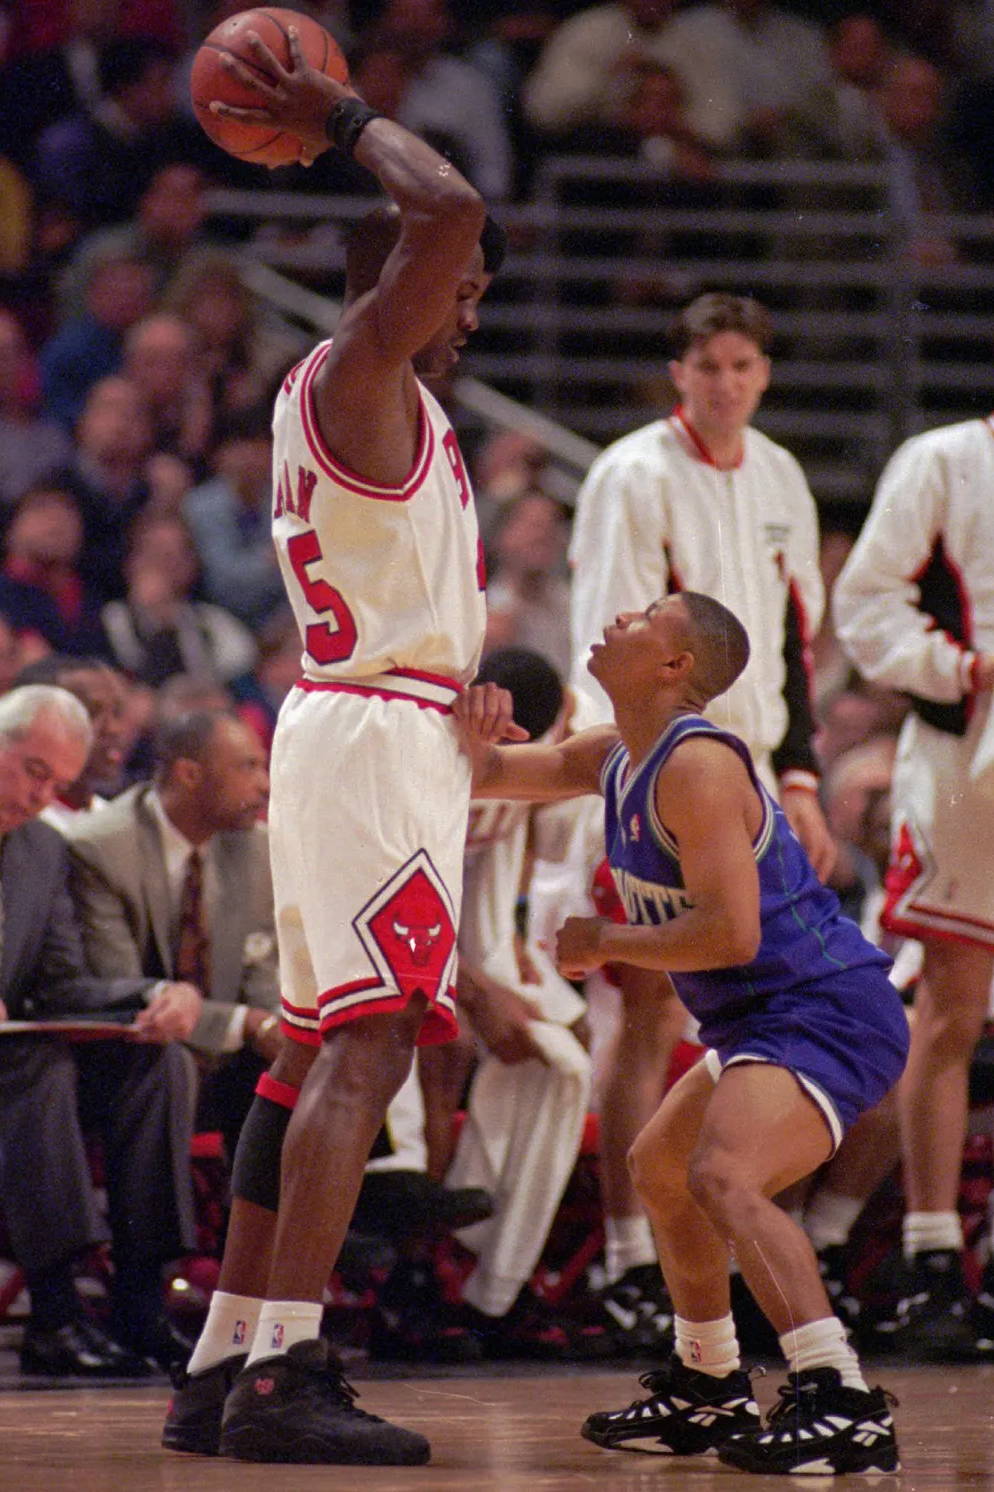 michael jordan in the aj10 towering over another basketball player